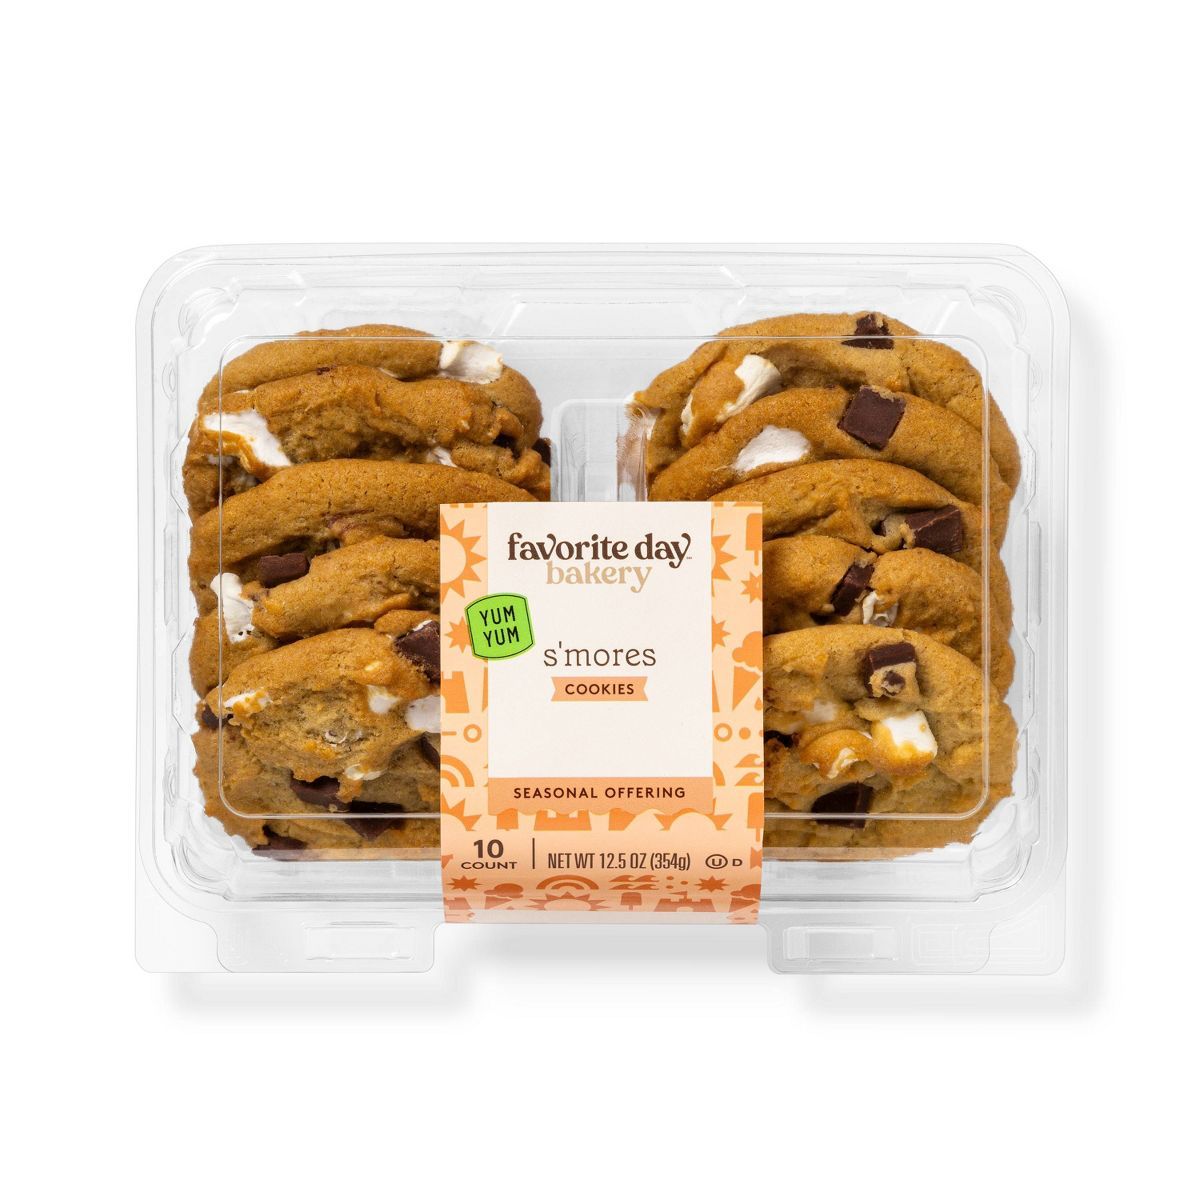 S'mores Cookies - 12.5oz - Favorite Day™ | Target